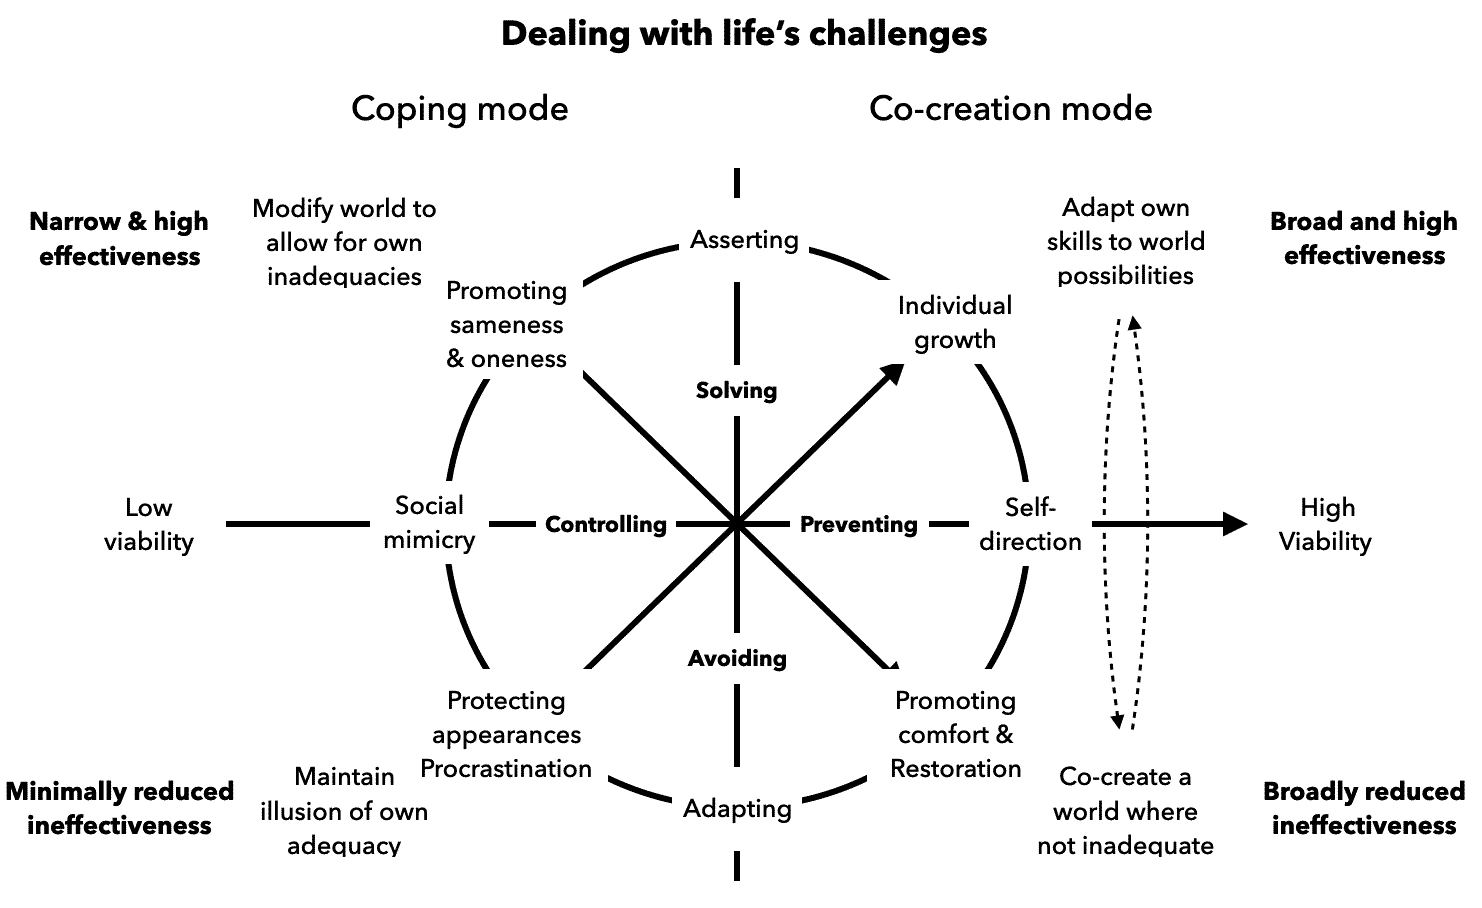 Figure 3. Dealing with Life’s challenges